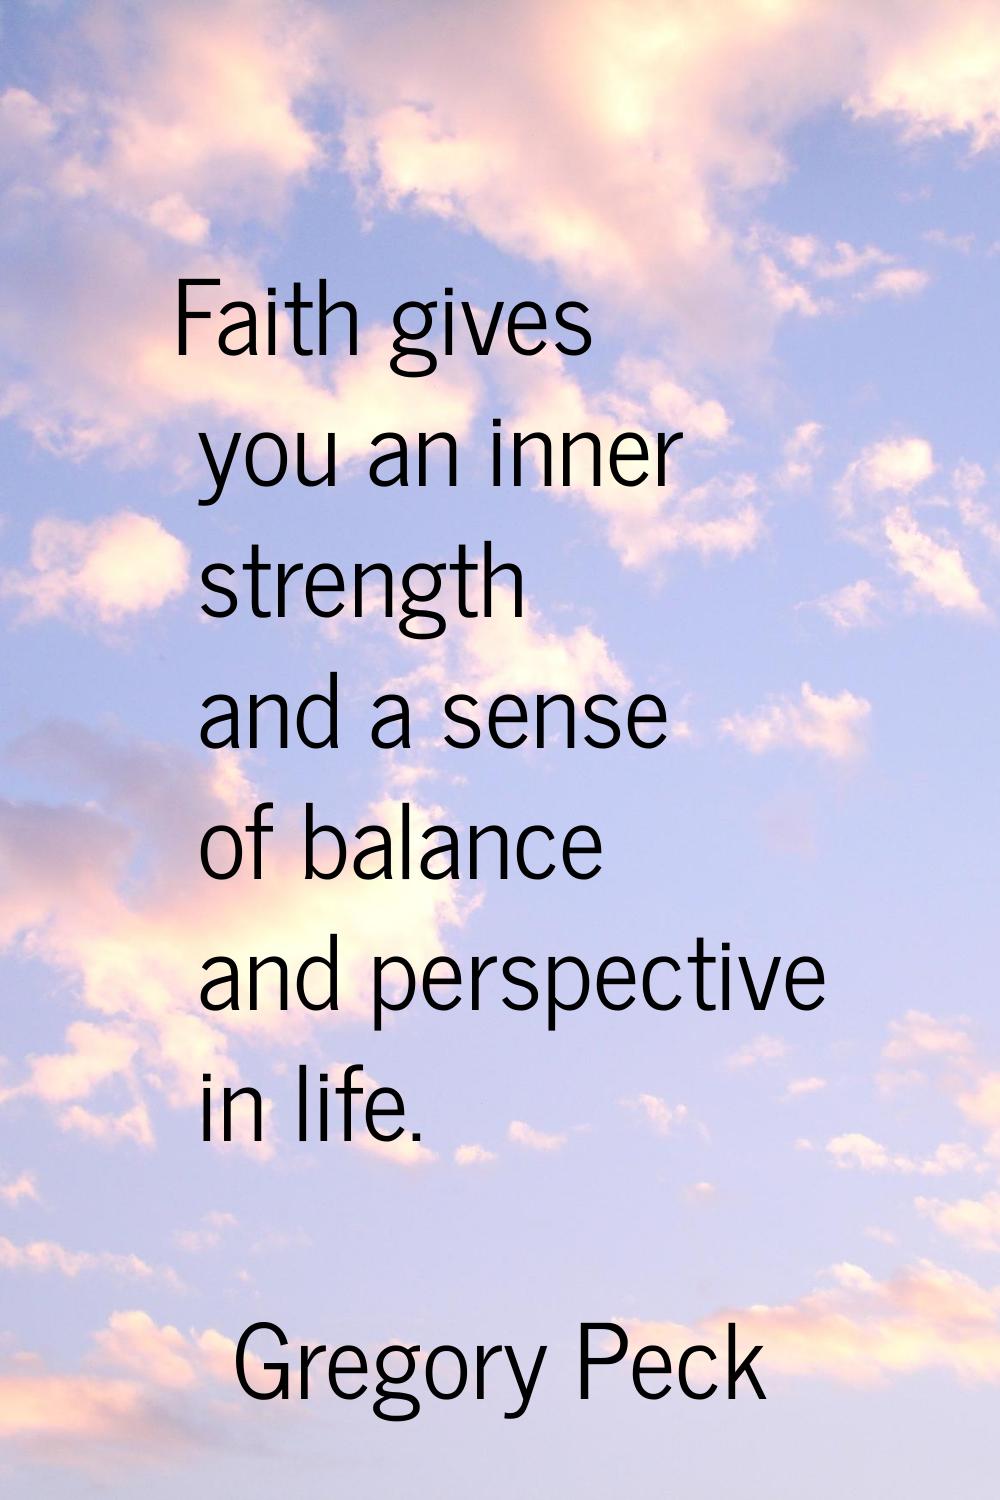 Faith gives you an inner strength and a sense of balance and perspective in life.